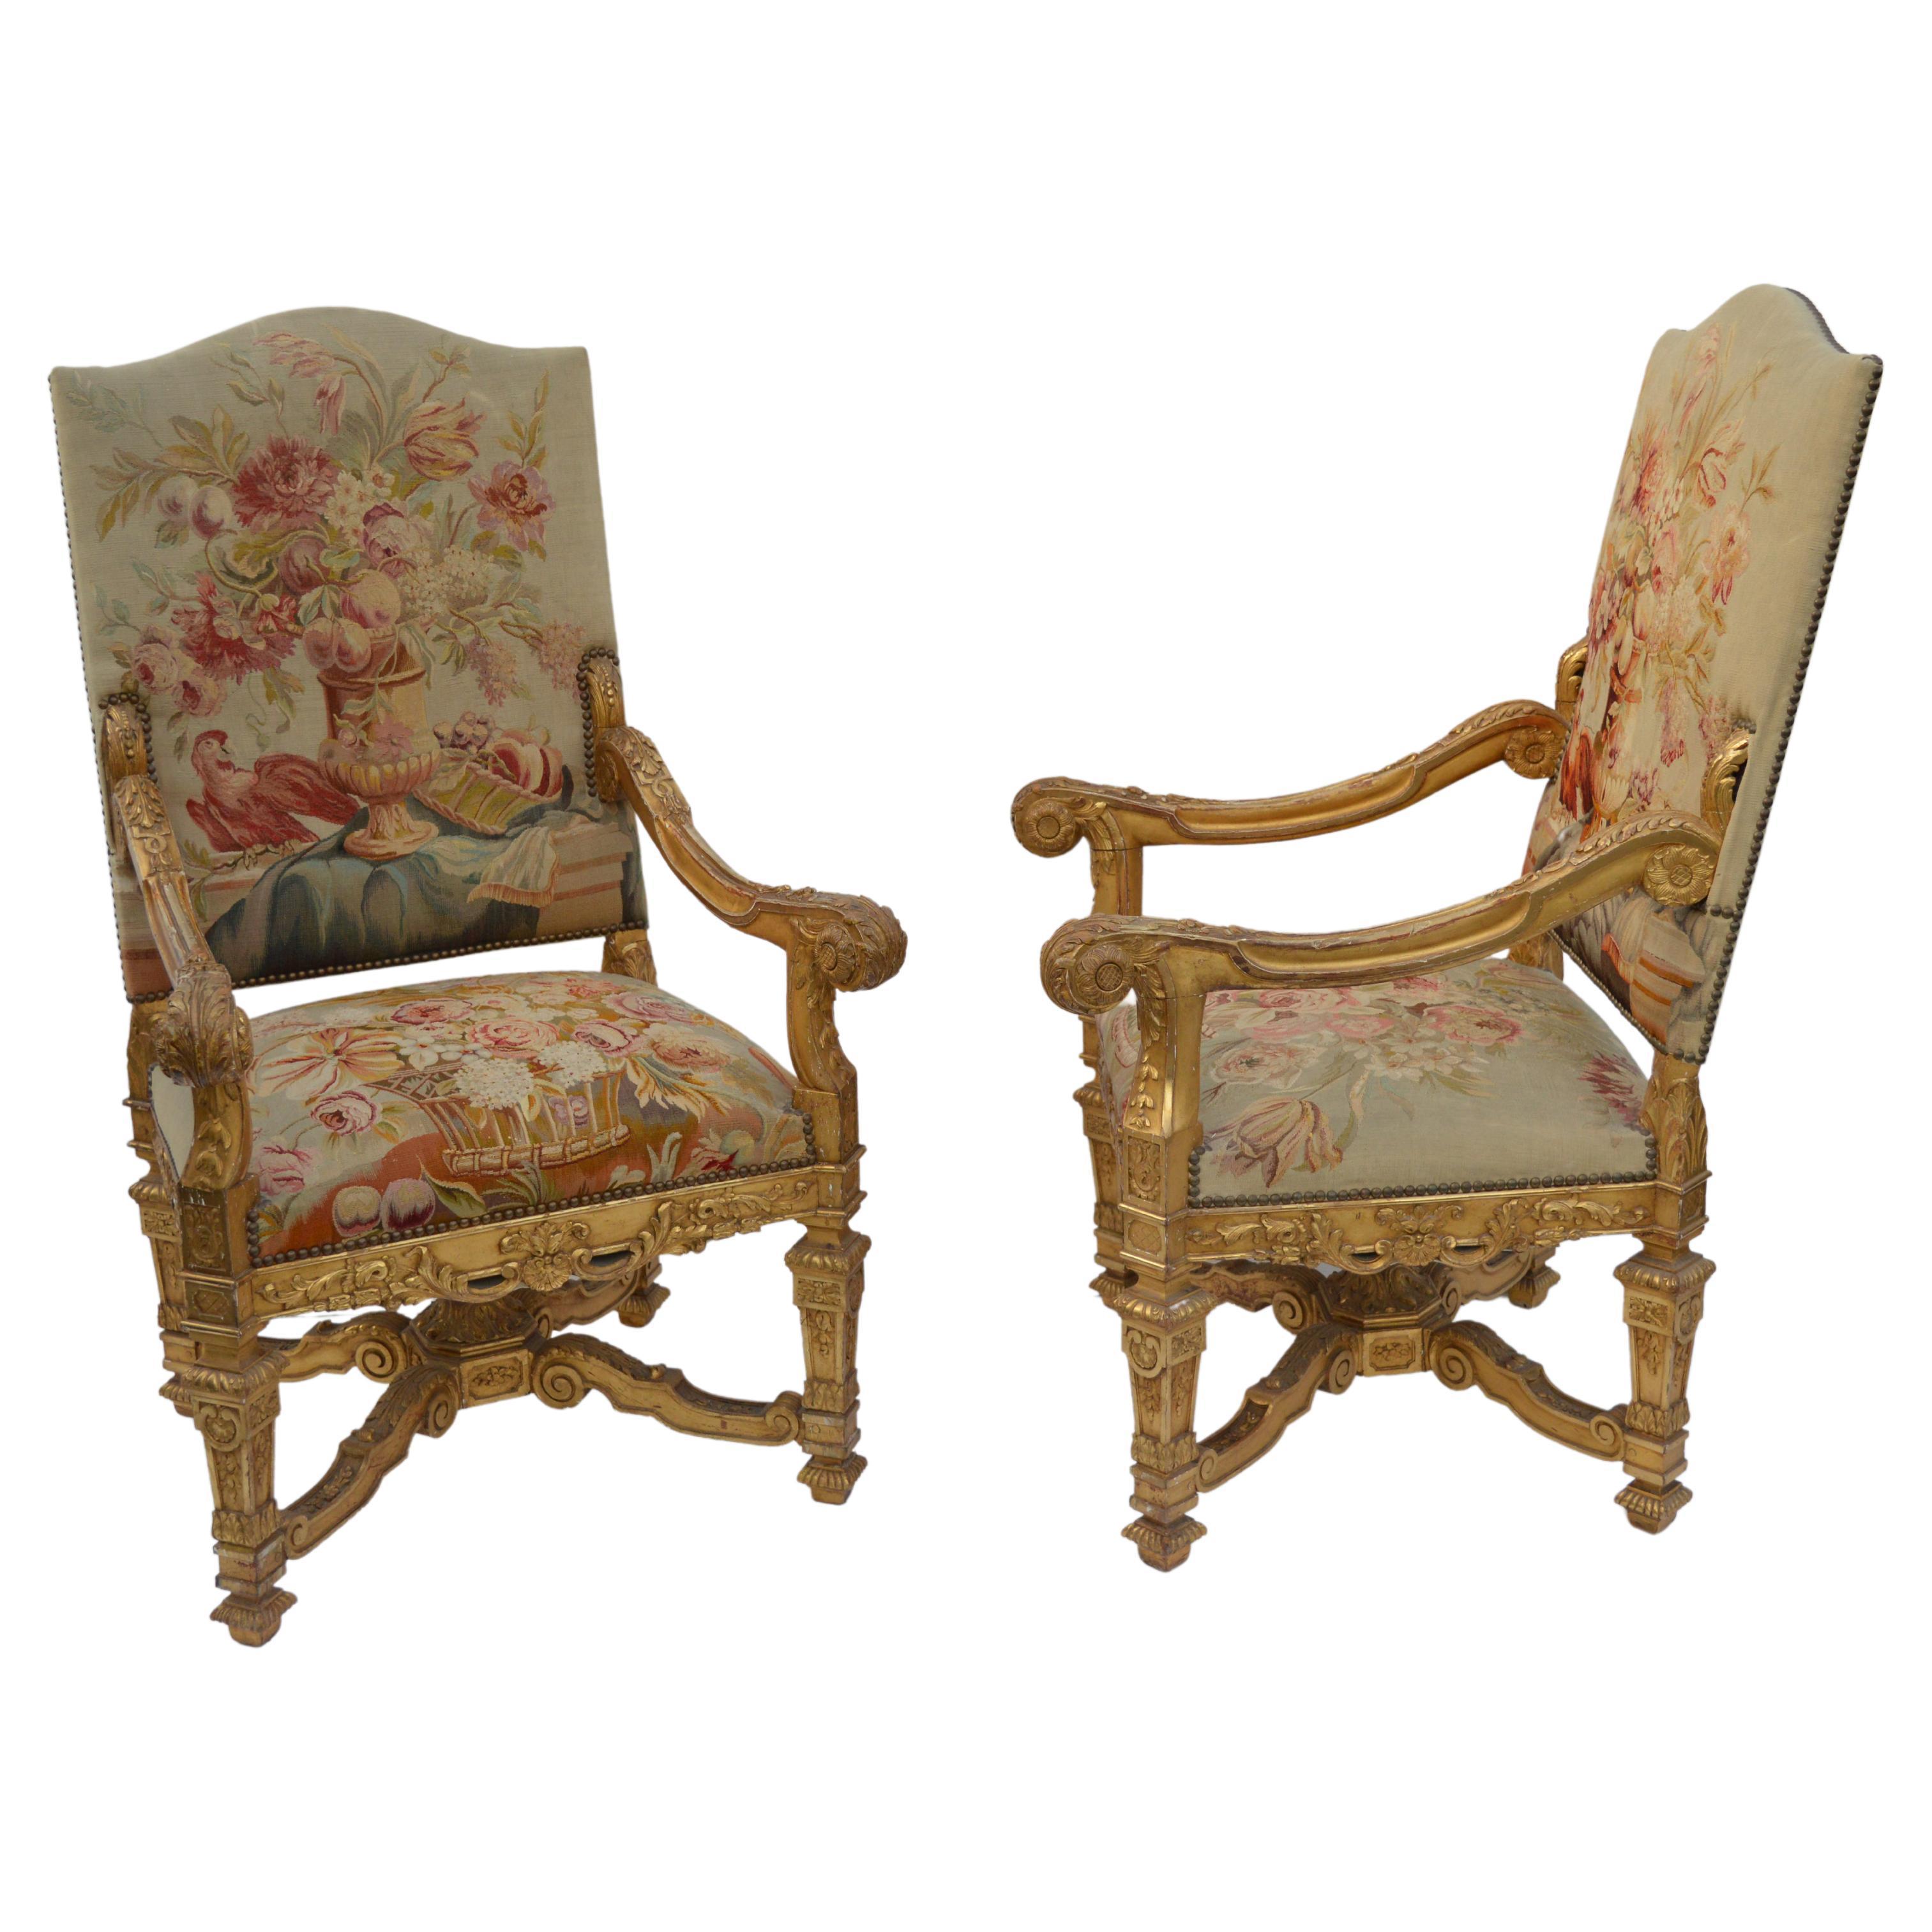 Pair of large late 19th century, French neoclassical water gilded, hand-carved walnut armchairs, with Tapestry upholstery.